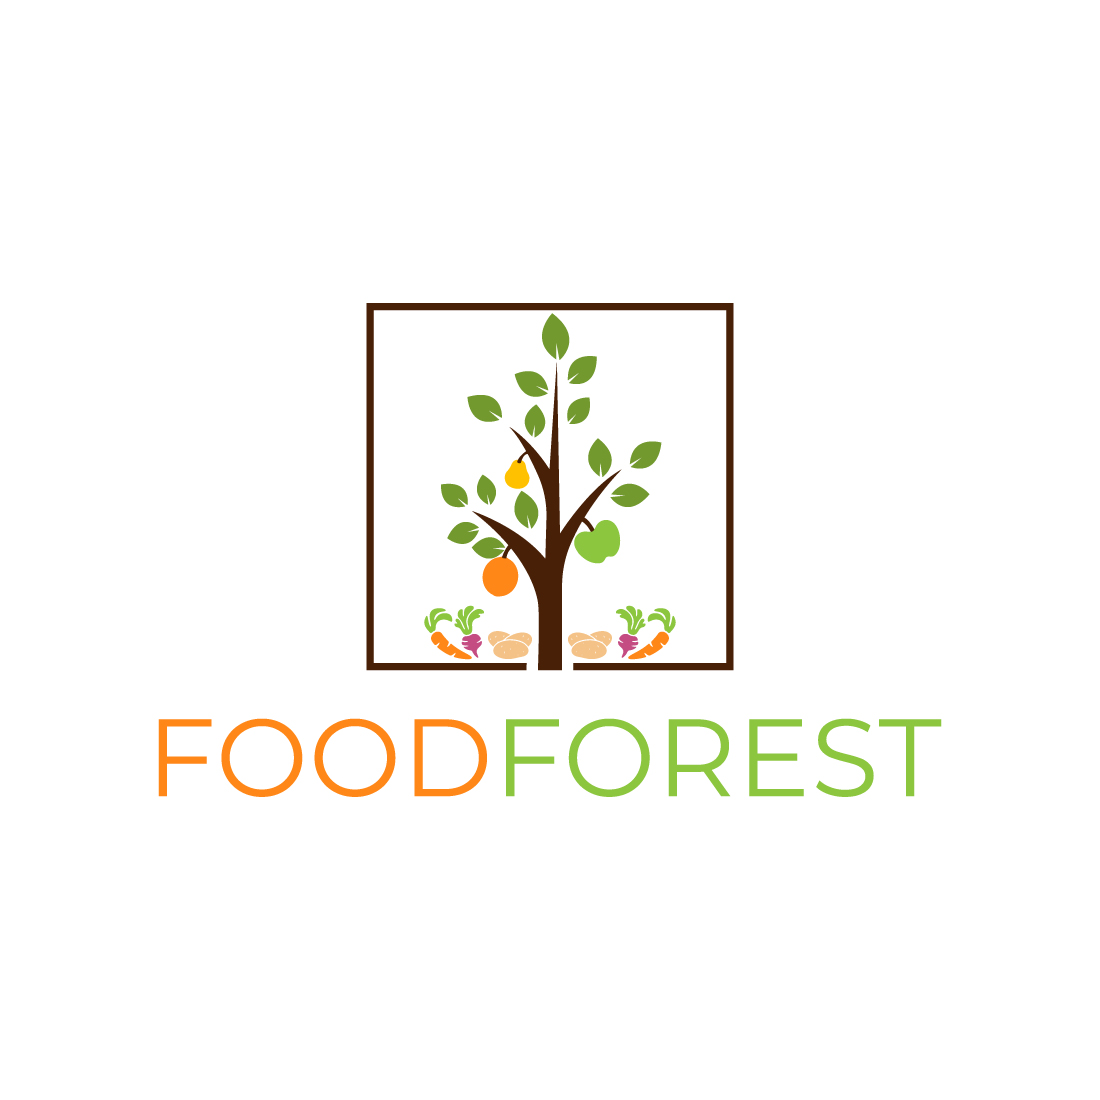 FoodForest Logo Template main cover